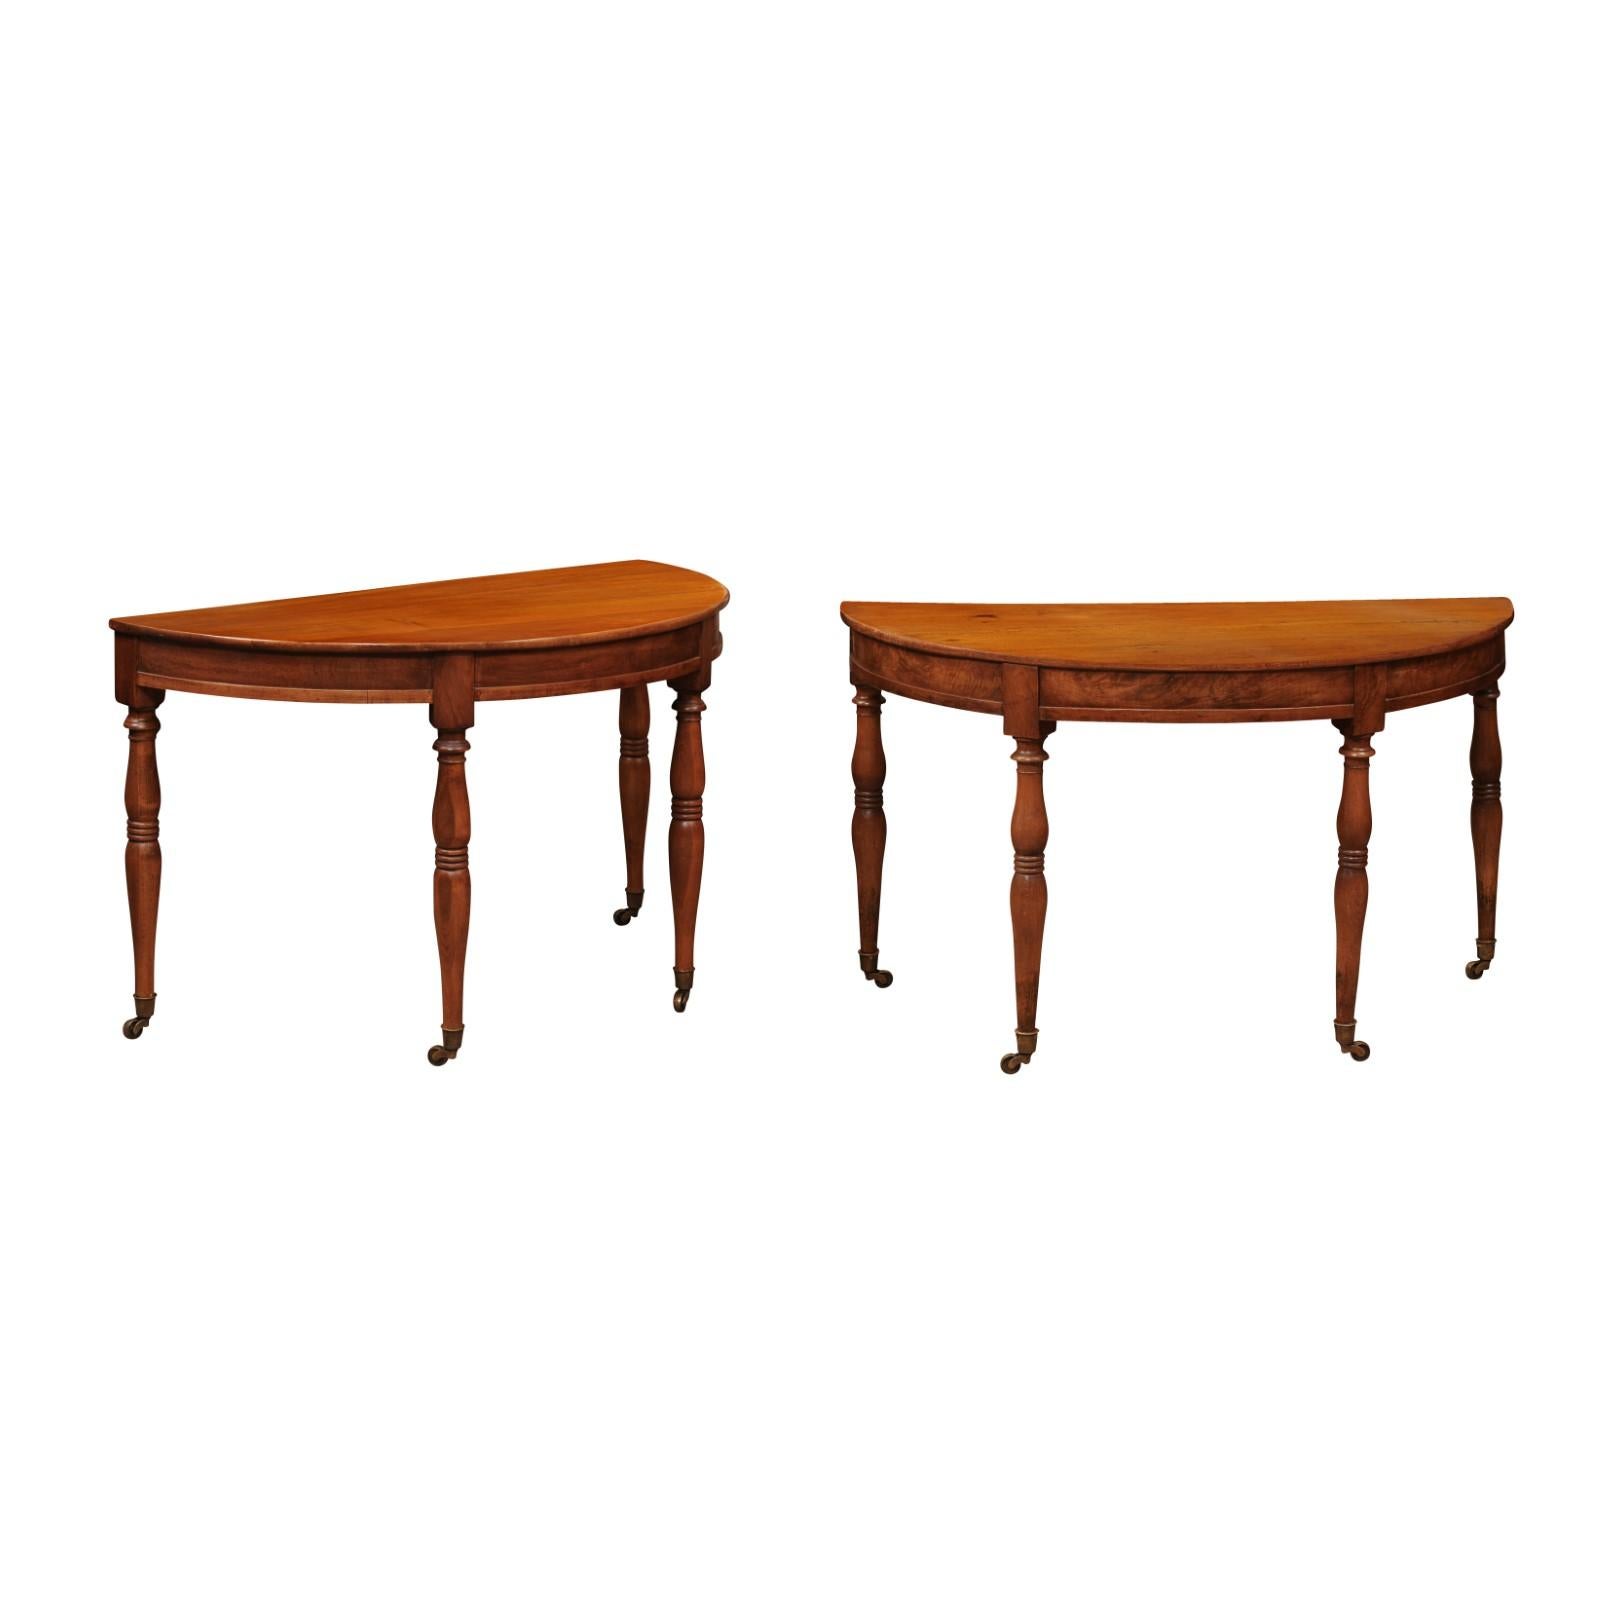 Pair of Matched French Louis Philippe Walnut Demilune Console Tables